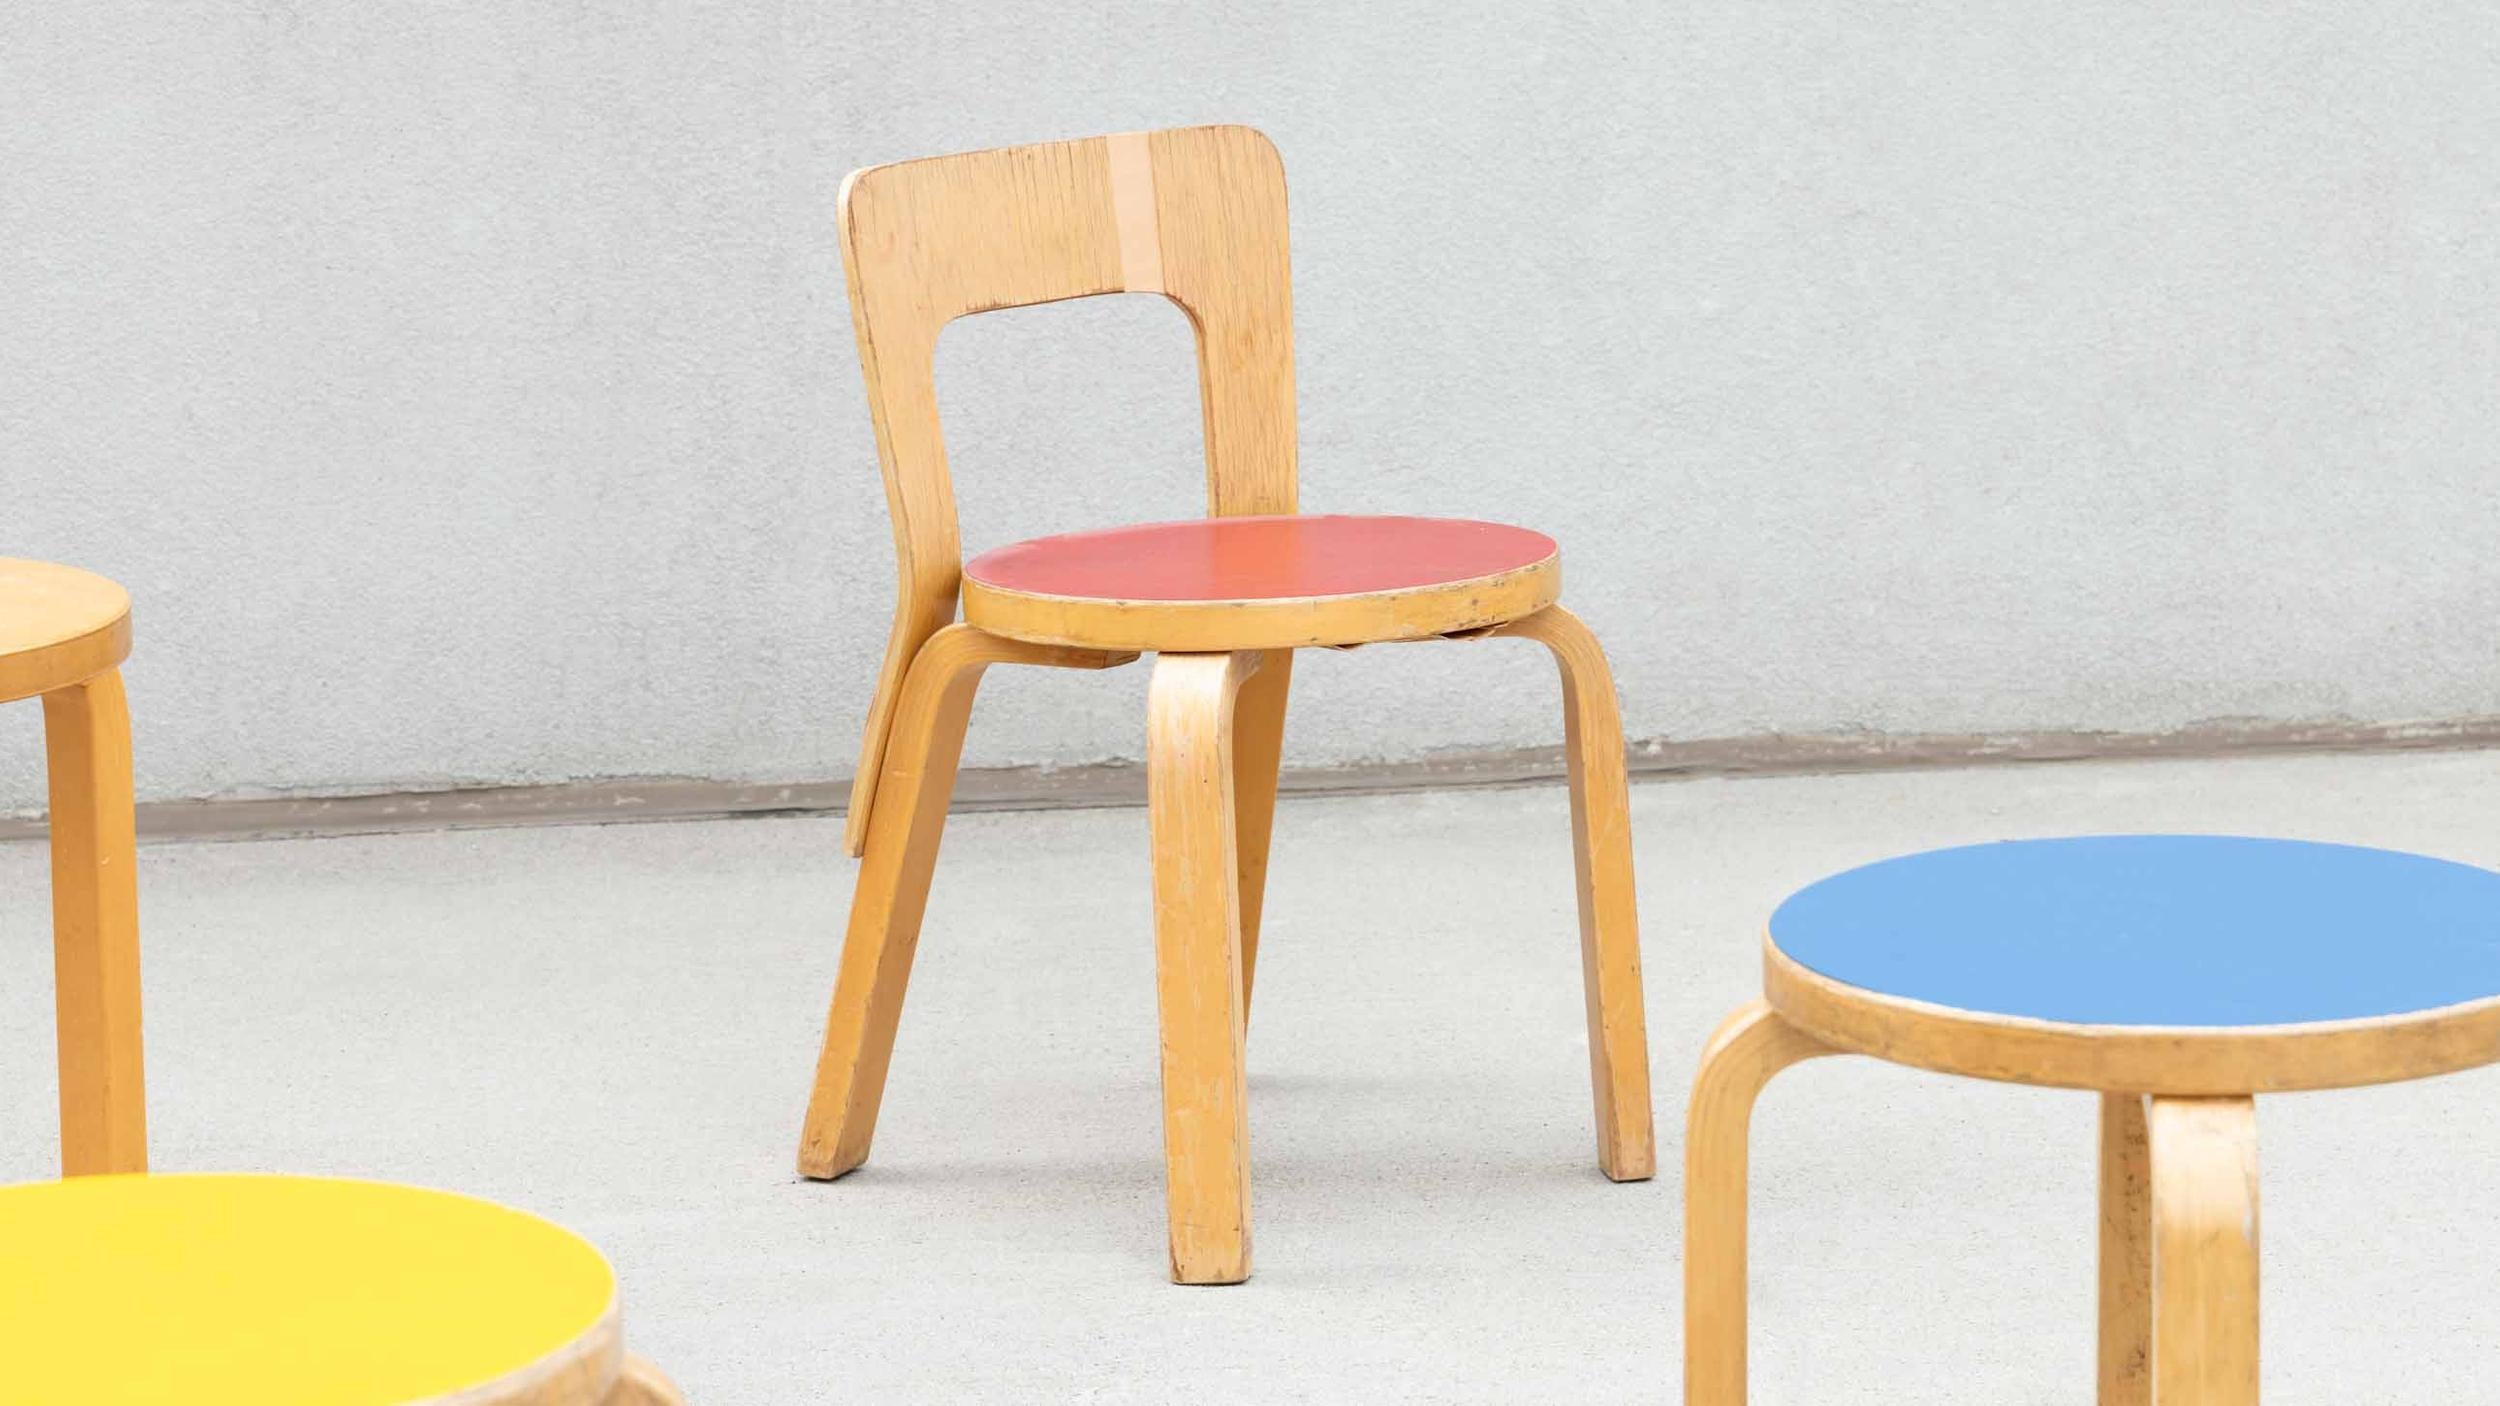 A pair of N65 chairs with red linoleum seats designed by Alvar Aalto for Artek, 1950s. Bentwood birch legs support a circular seat. Can be used for seating or as a plant or object stand. Substantial wear and use, as pictured.

color: light birch,